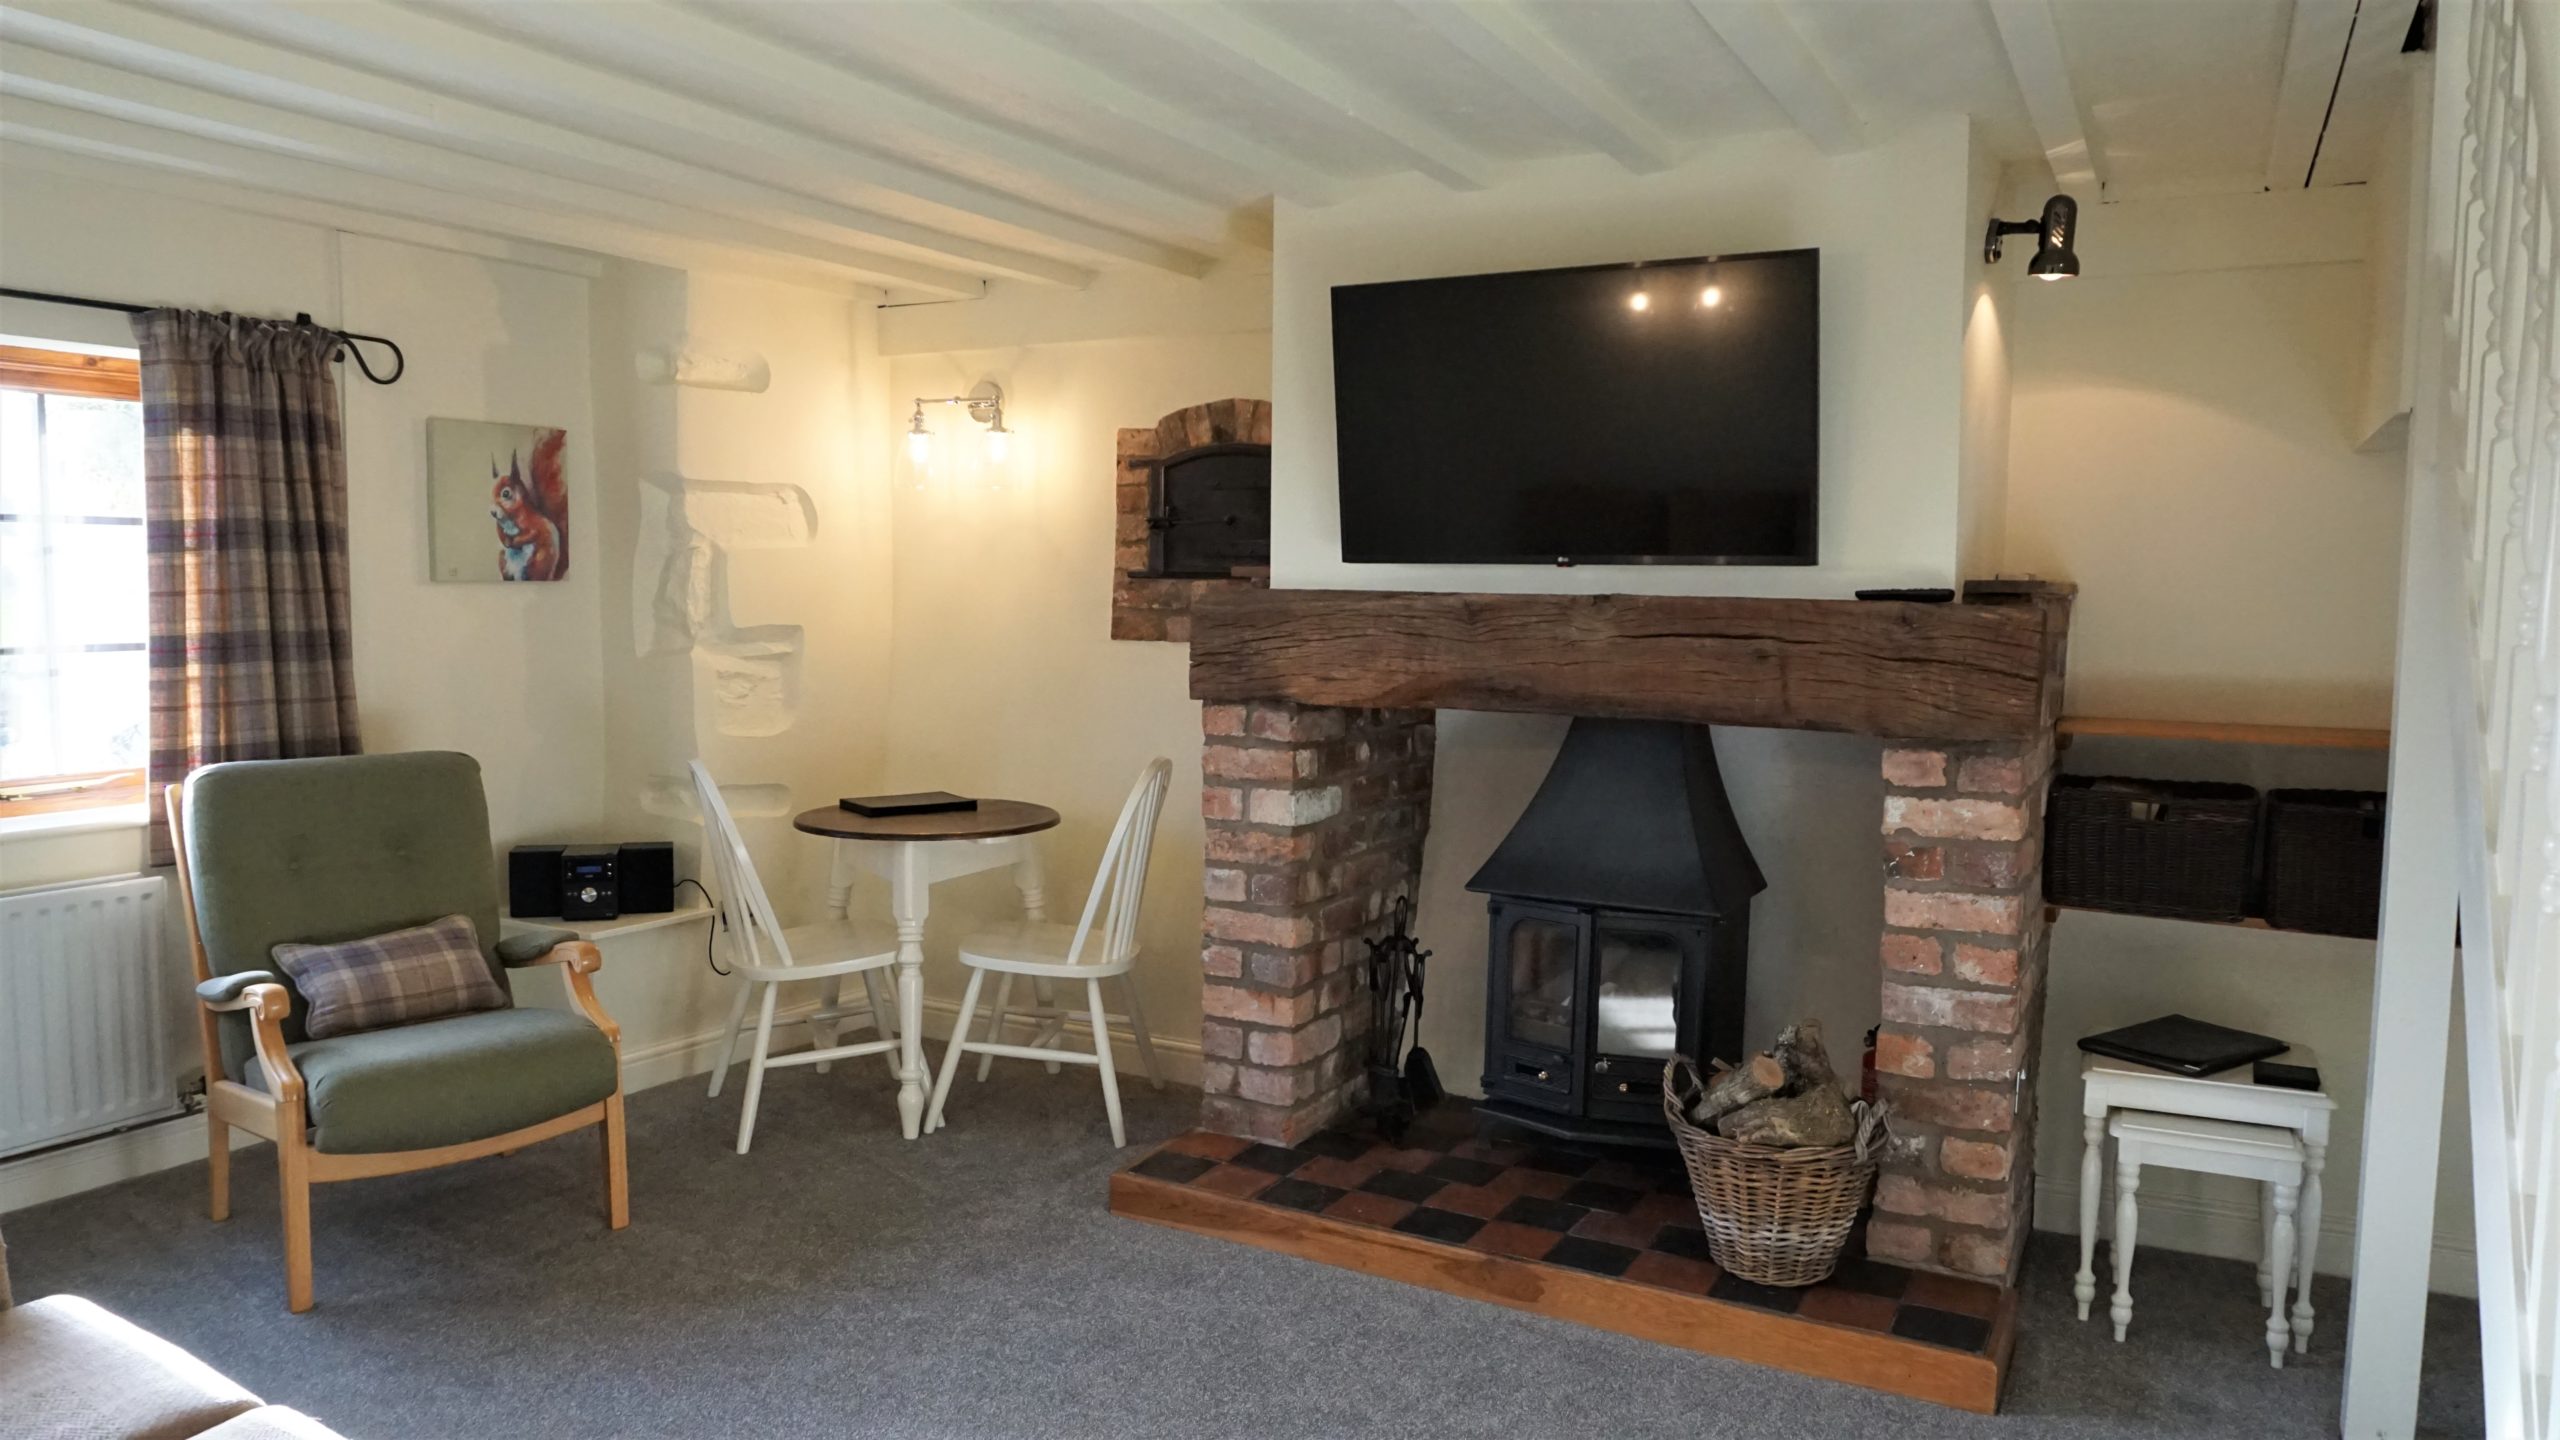 With a cosy log burner. Barley cottage offers the ideal couples hot tub holiday